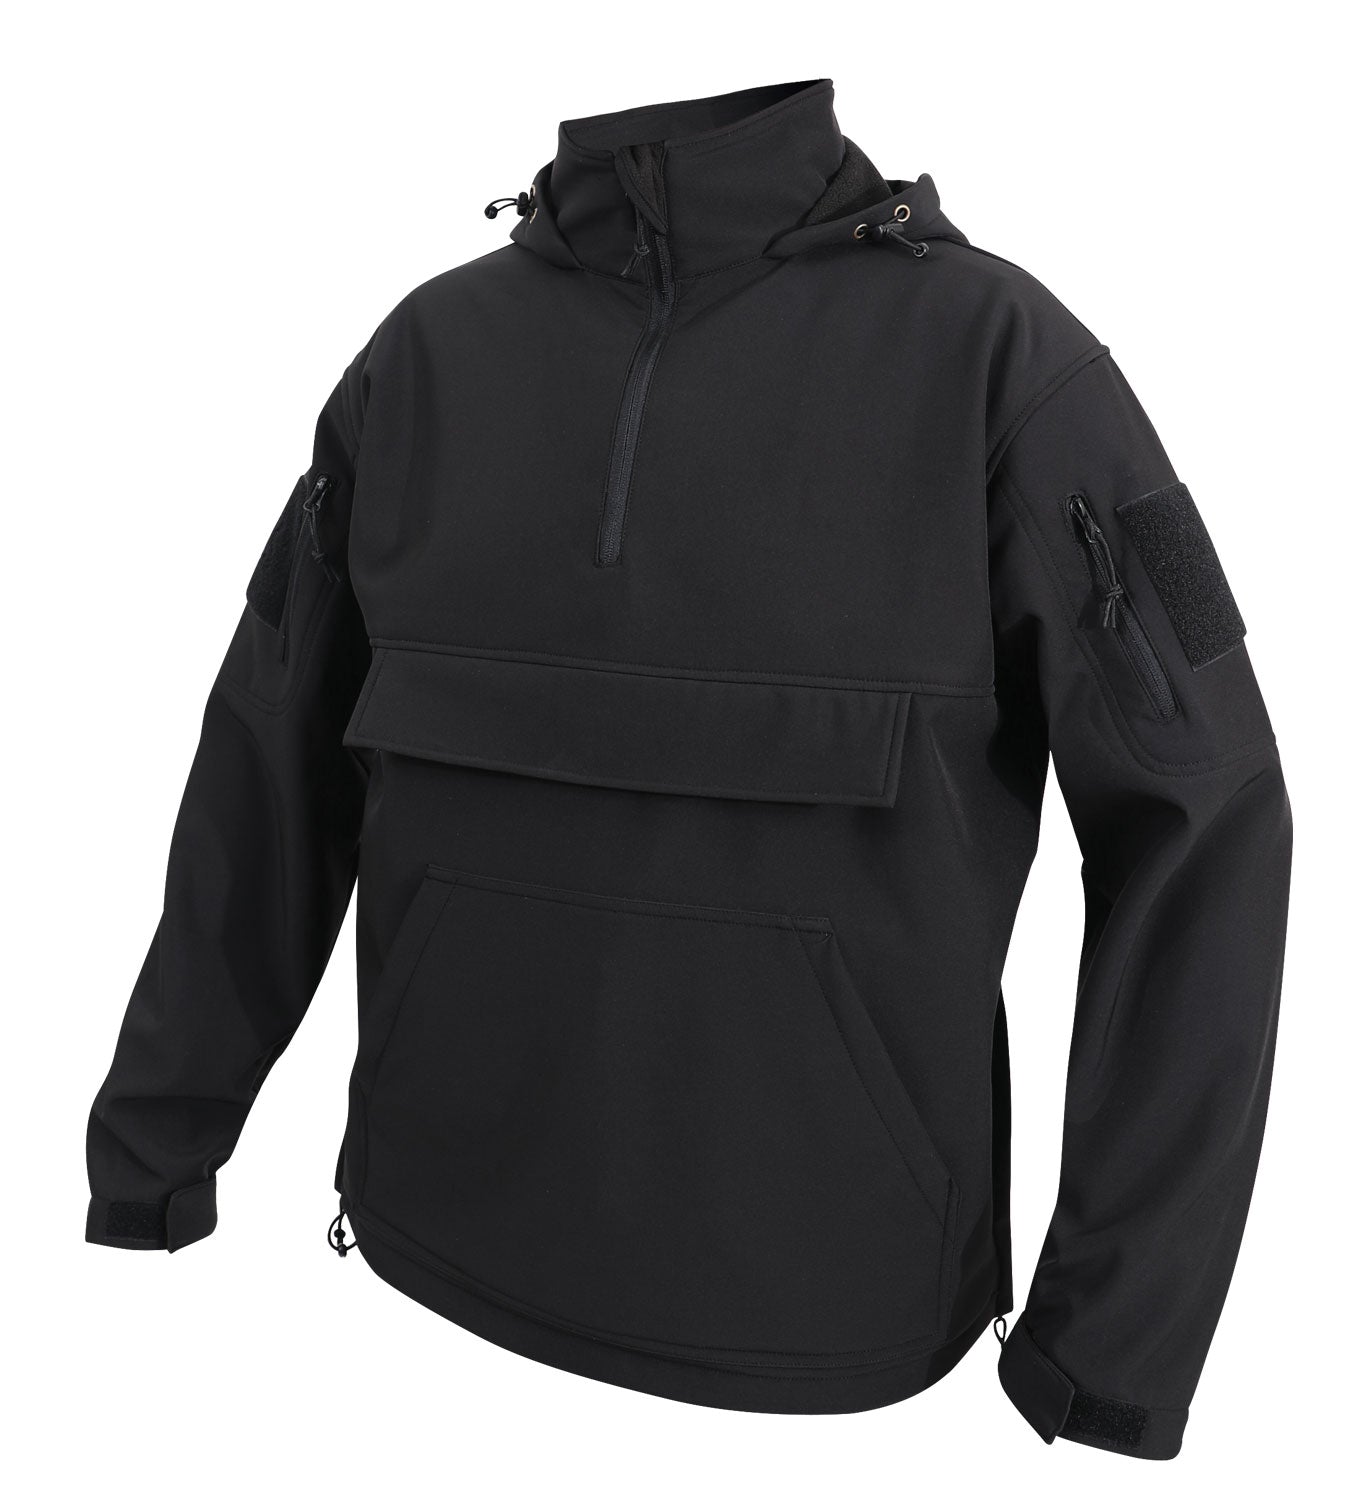 Rothco Concealed Carry Soft Shell Black Anorak Parka - Includes 2 USA Patches